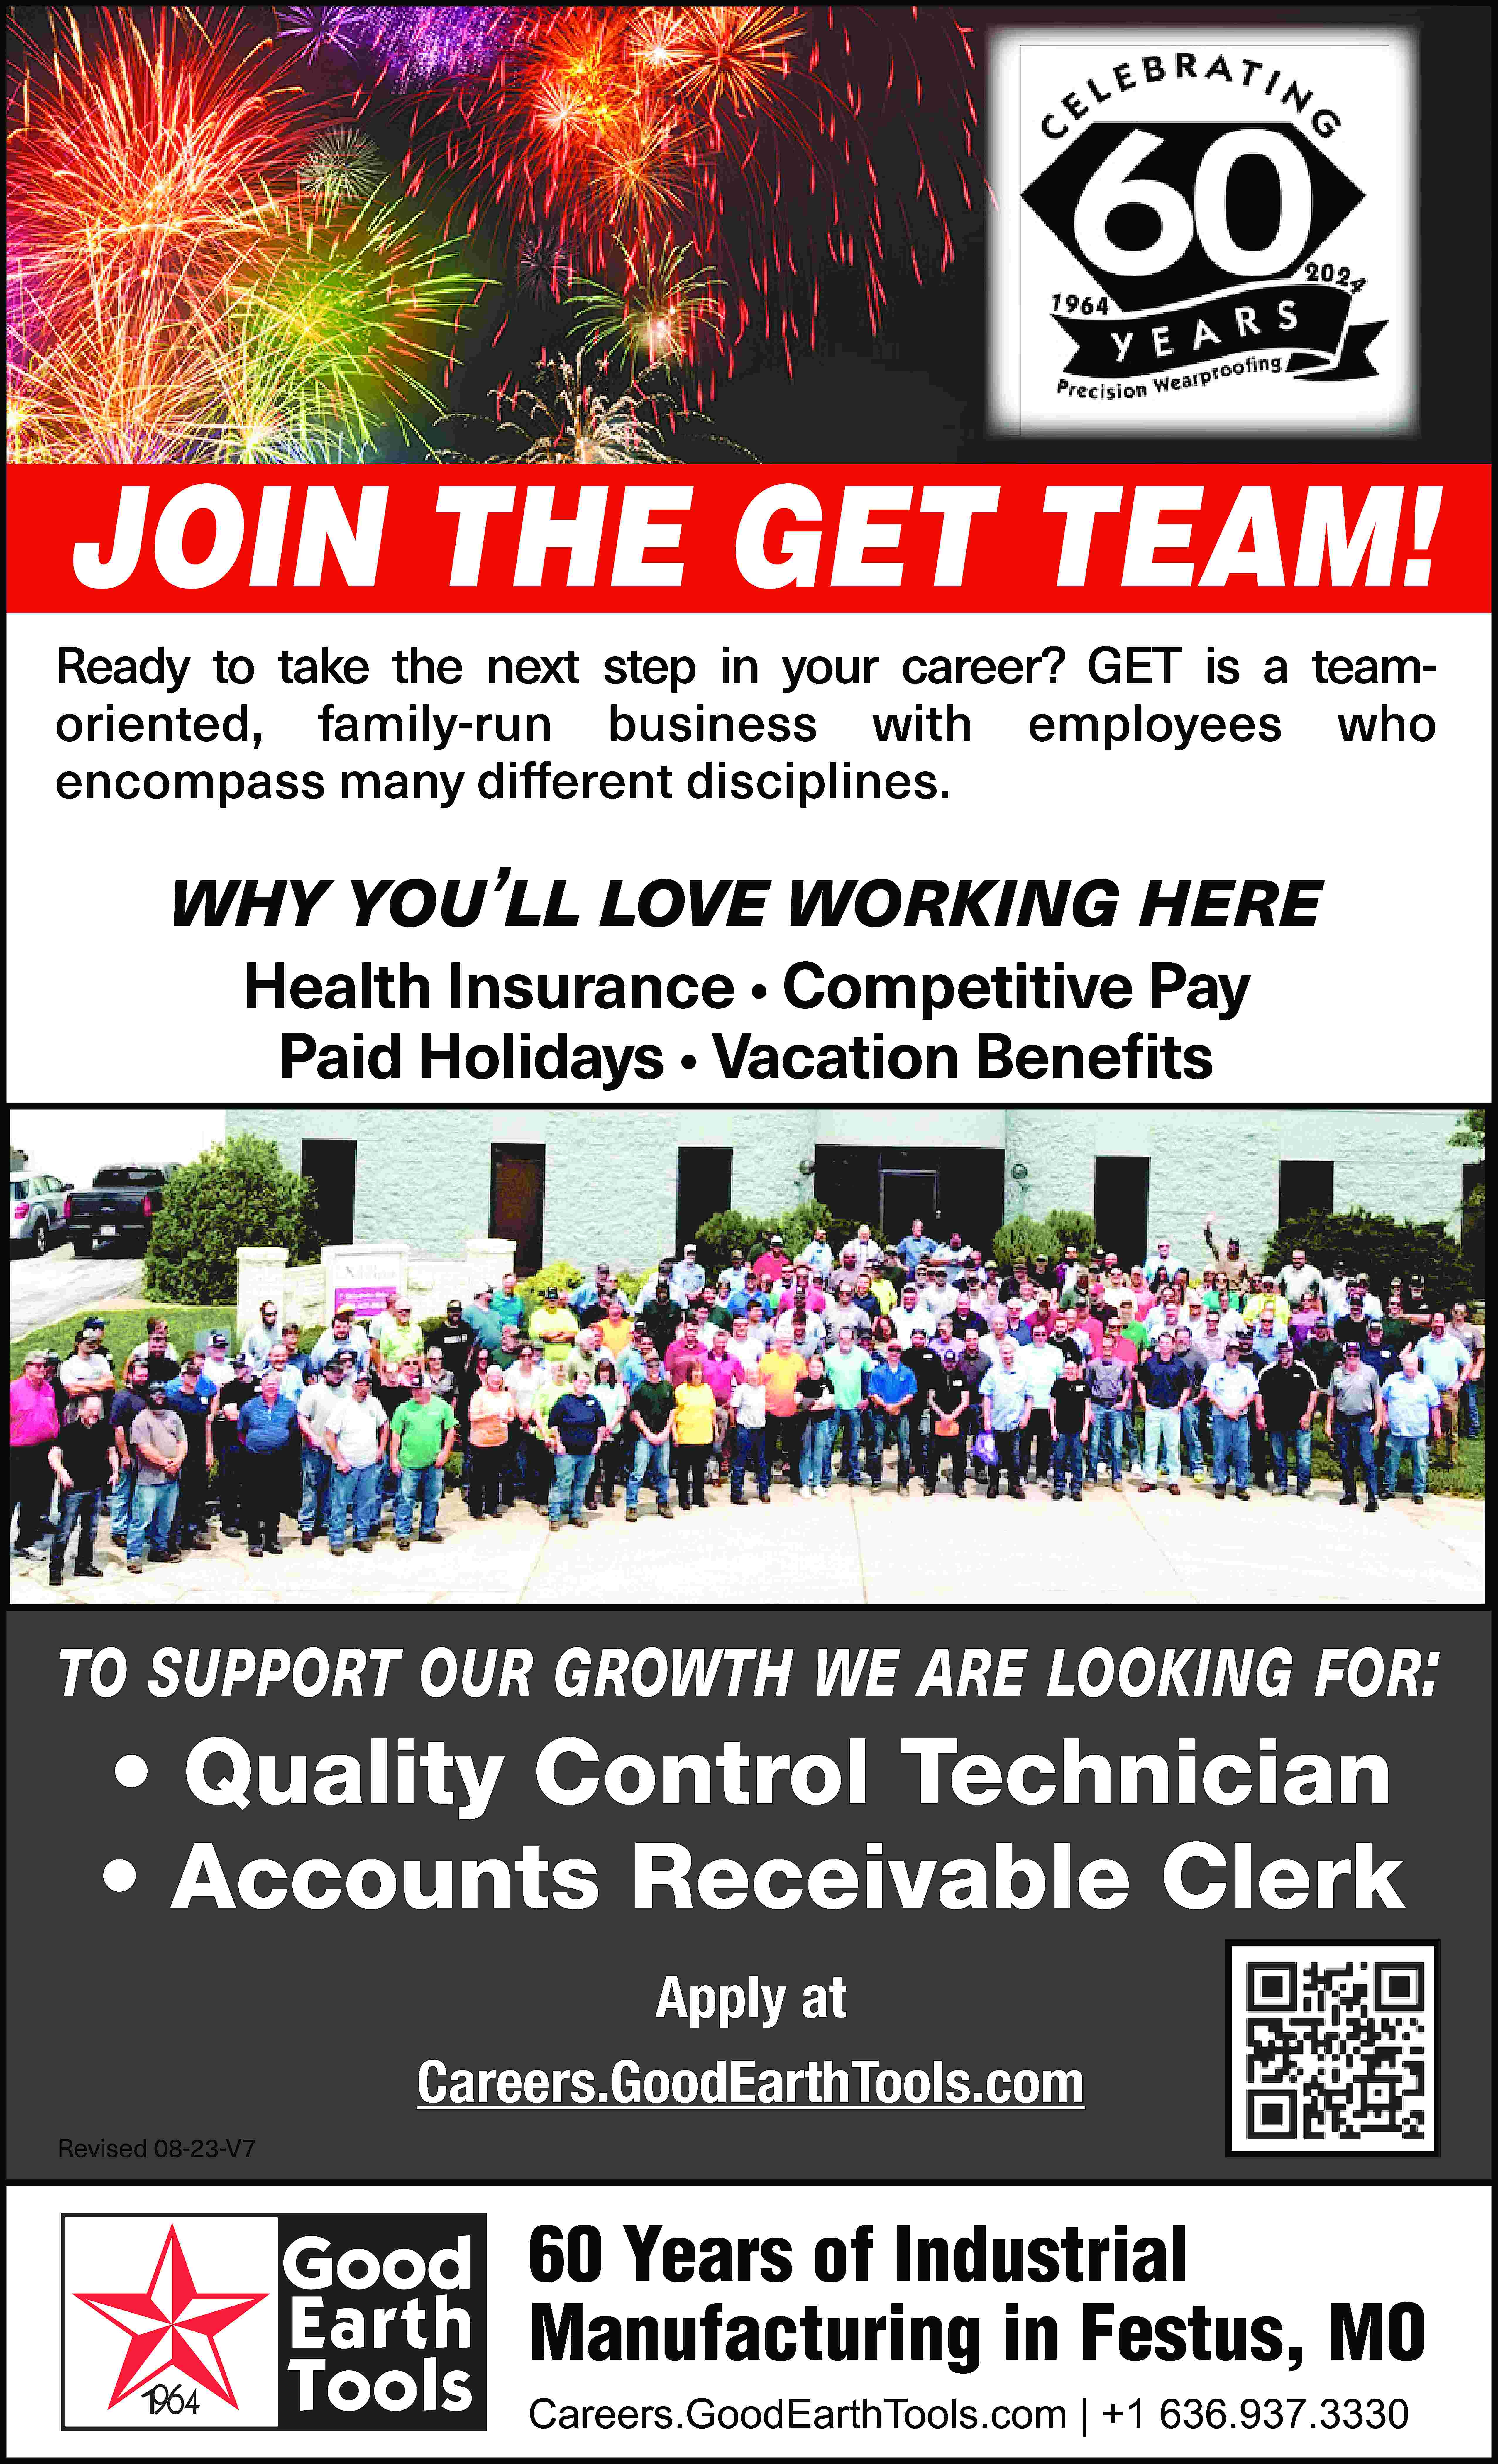 join the the get get  join the the get get team team!! join join the get team! JOIN THE GET TEAM! Ready to take the next step in your career? GET is a teamoriented, family-run business with employees who encompass many different disciplines. why you’ll love working here Health Insurance • Competitive Pay Paid Holidays • Vacation Benefits to support our growth we are looking for: to support our growth we are looking for: to support our growth we are looking for: Quality to•support ourControl growth we Technician are looking for: • Accounts Receivable Clerk Apply at Careers.GoodEarthTools.com Revised 08-23-V7 60 Years of Industrial Manufacturing in Festus, MO Careers.GoodEarthTools.com | +1 636.937.3330